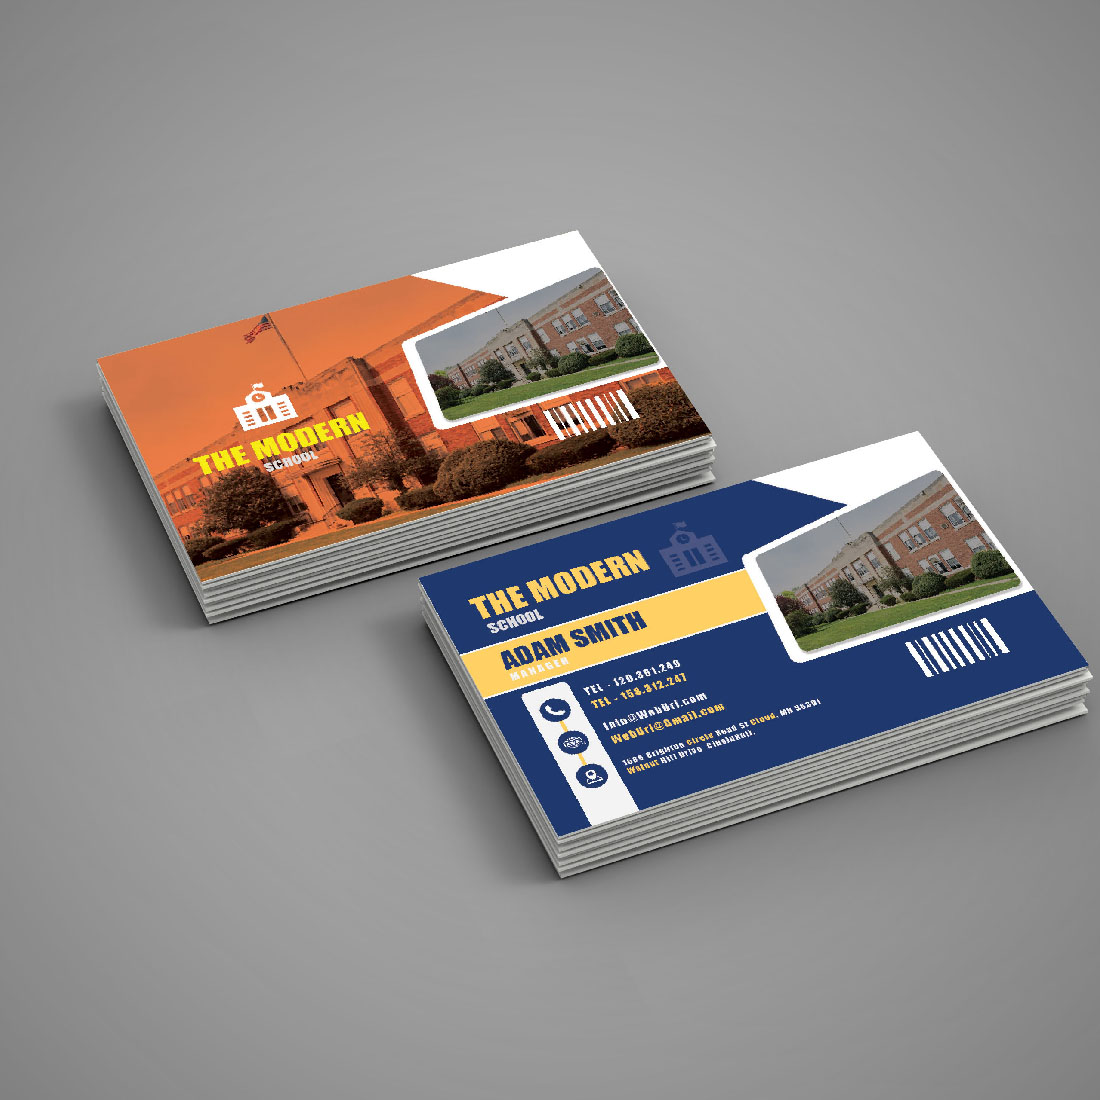 Creative School Education Business Card Template cover image.